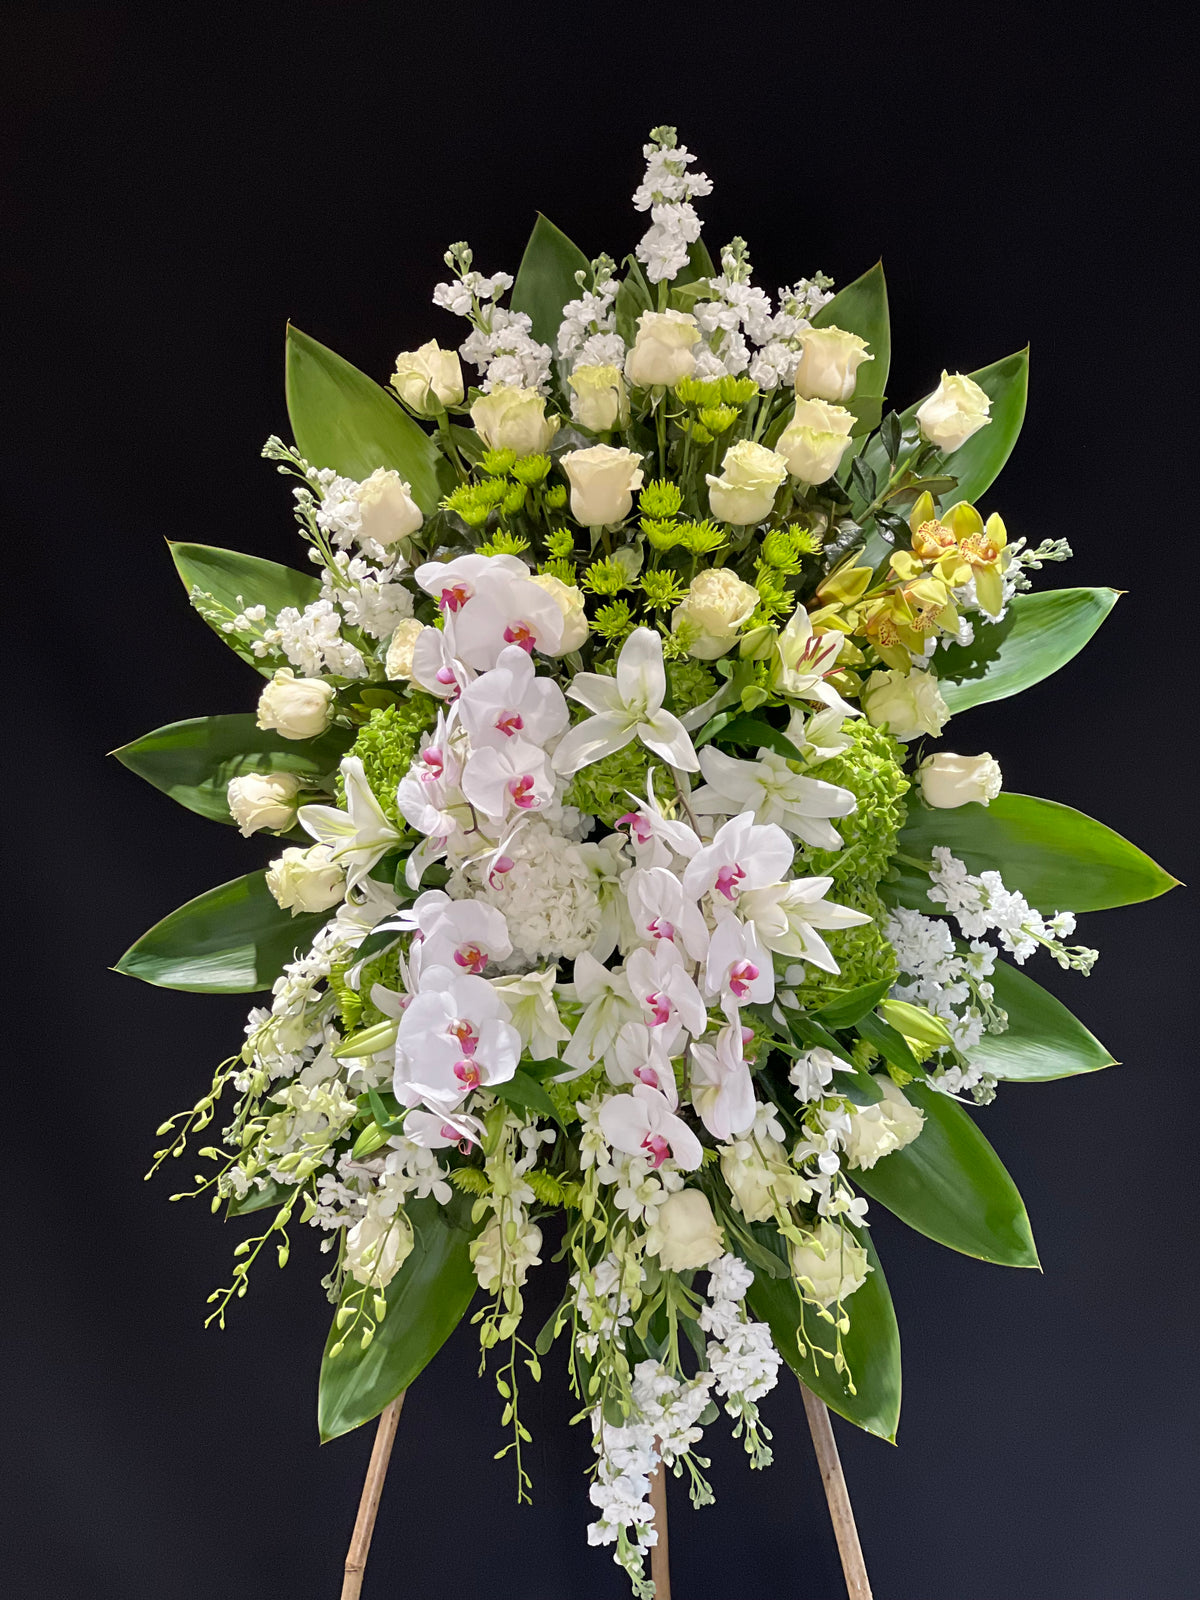 A touching floral spray featuring lilies, stocks, roses, dendrobium orchids, green daisies, and phalaenopsis orchids, designed to offer solace and sympathy during moments of loss. A graceful tribute from Yonge Florist, available for local GTA delivery to funeral homes, churches, chapels, and mosques